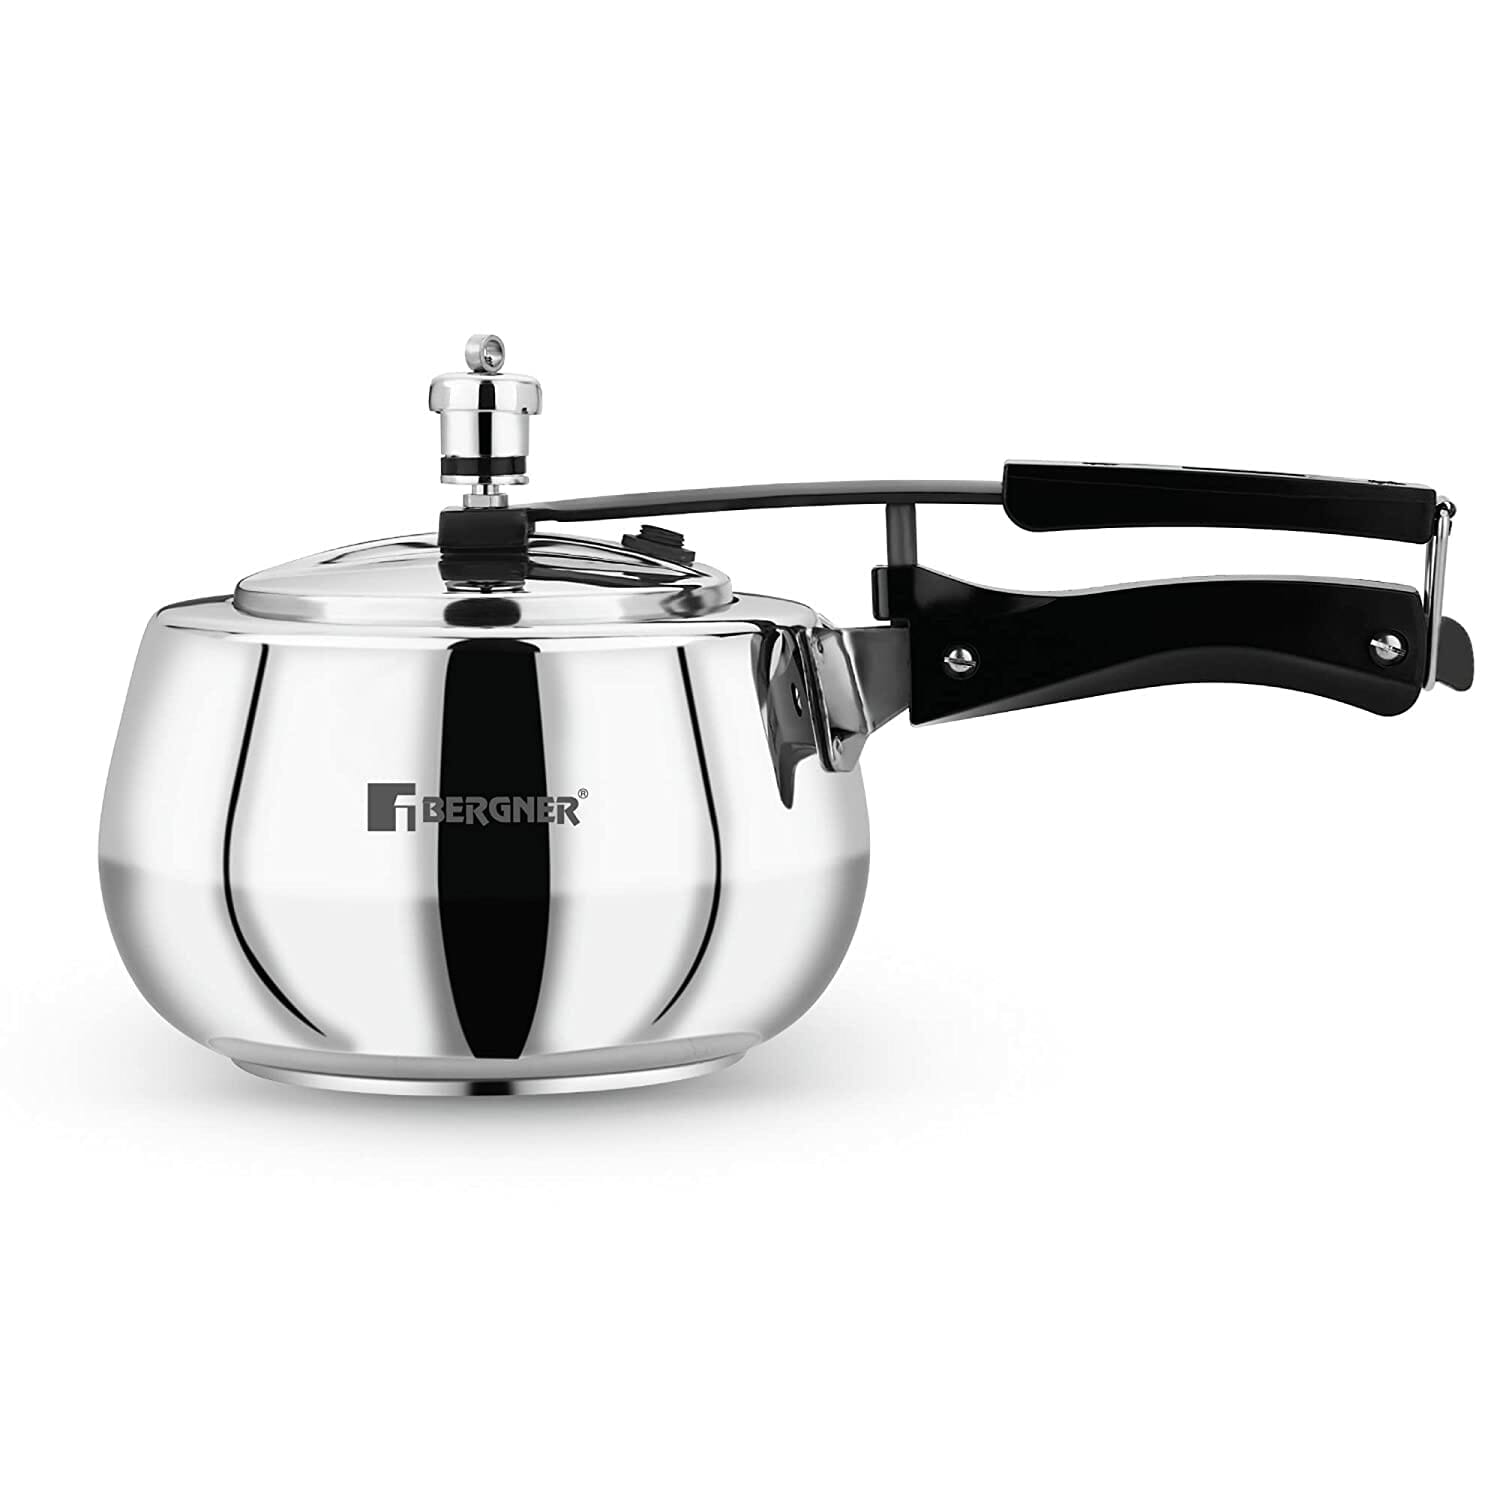 Silver Bergner Infinity Chef Pressure Cooker 22 cm Stainless Steel 